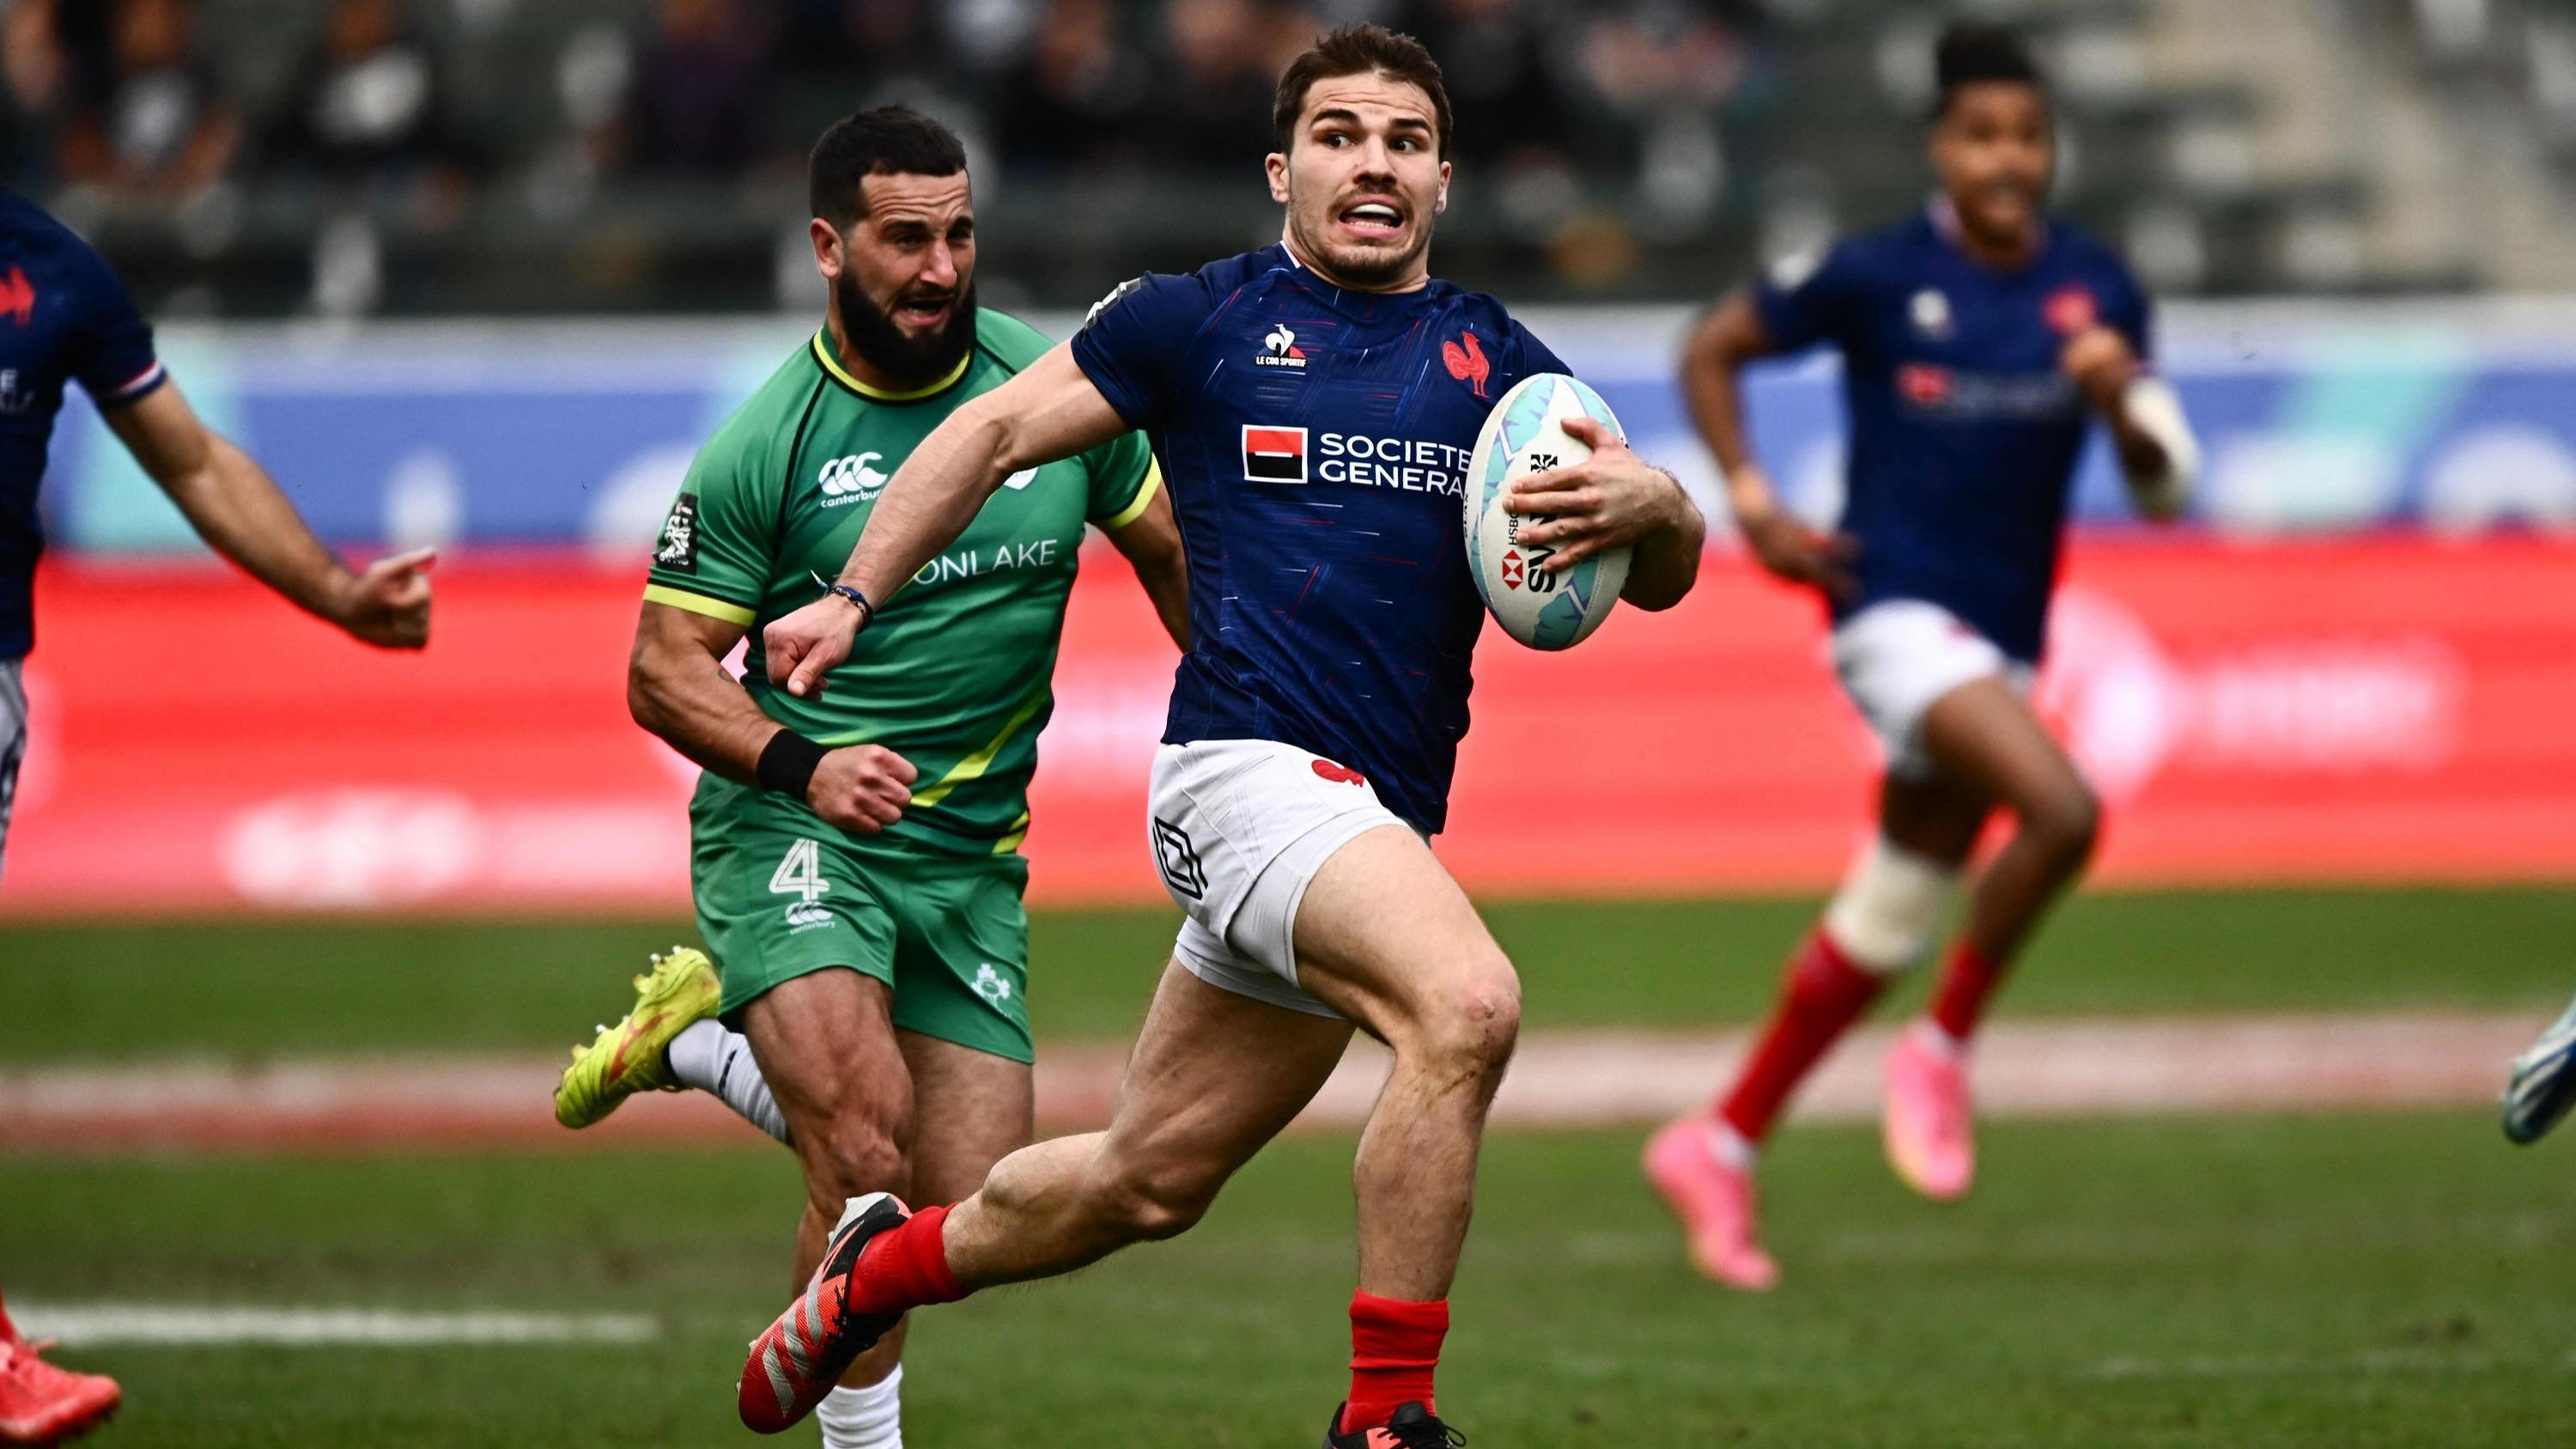 Rugby 7s: the Blues and Antoine Dupont reach the final of the Los Angeles tournament